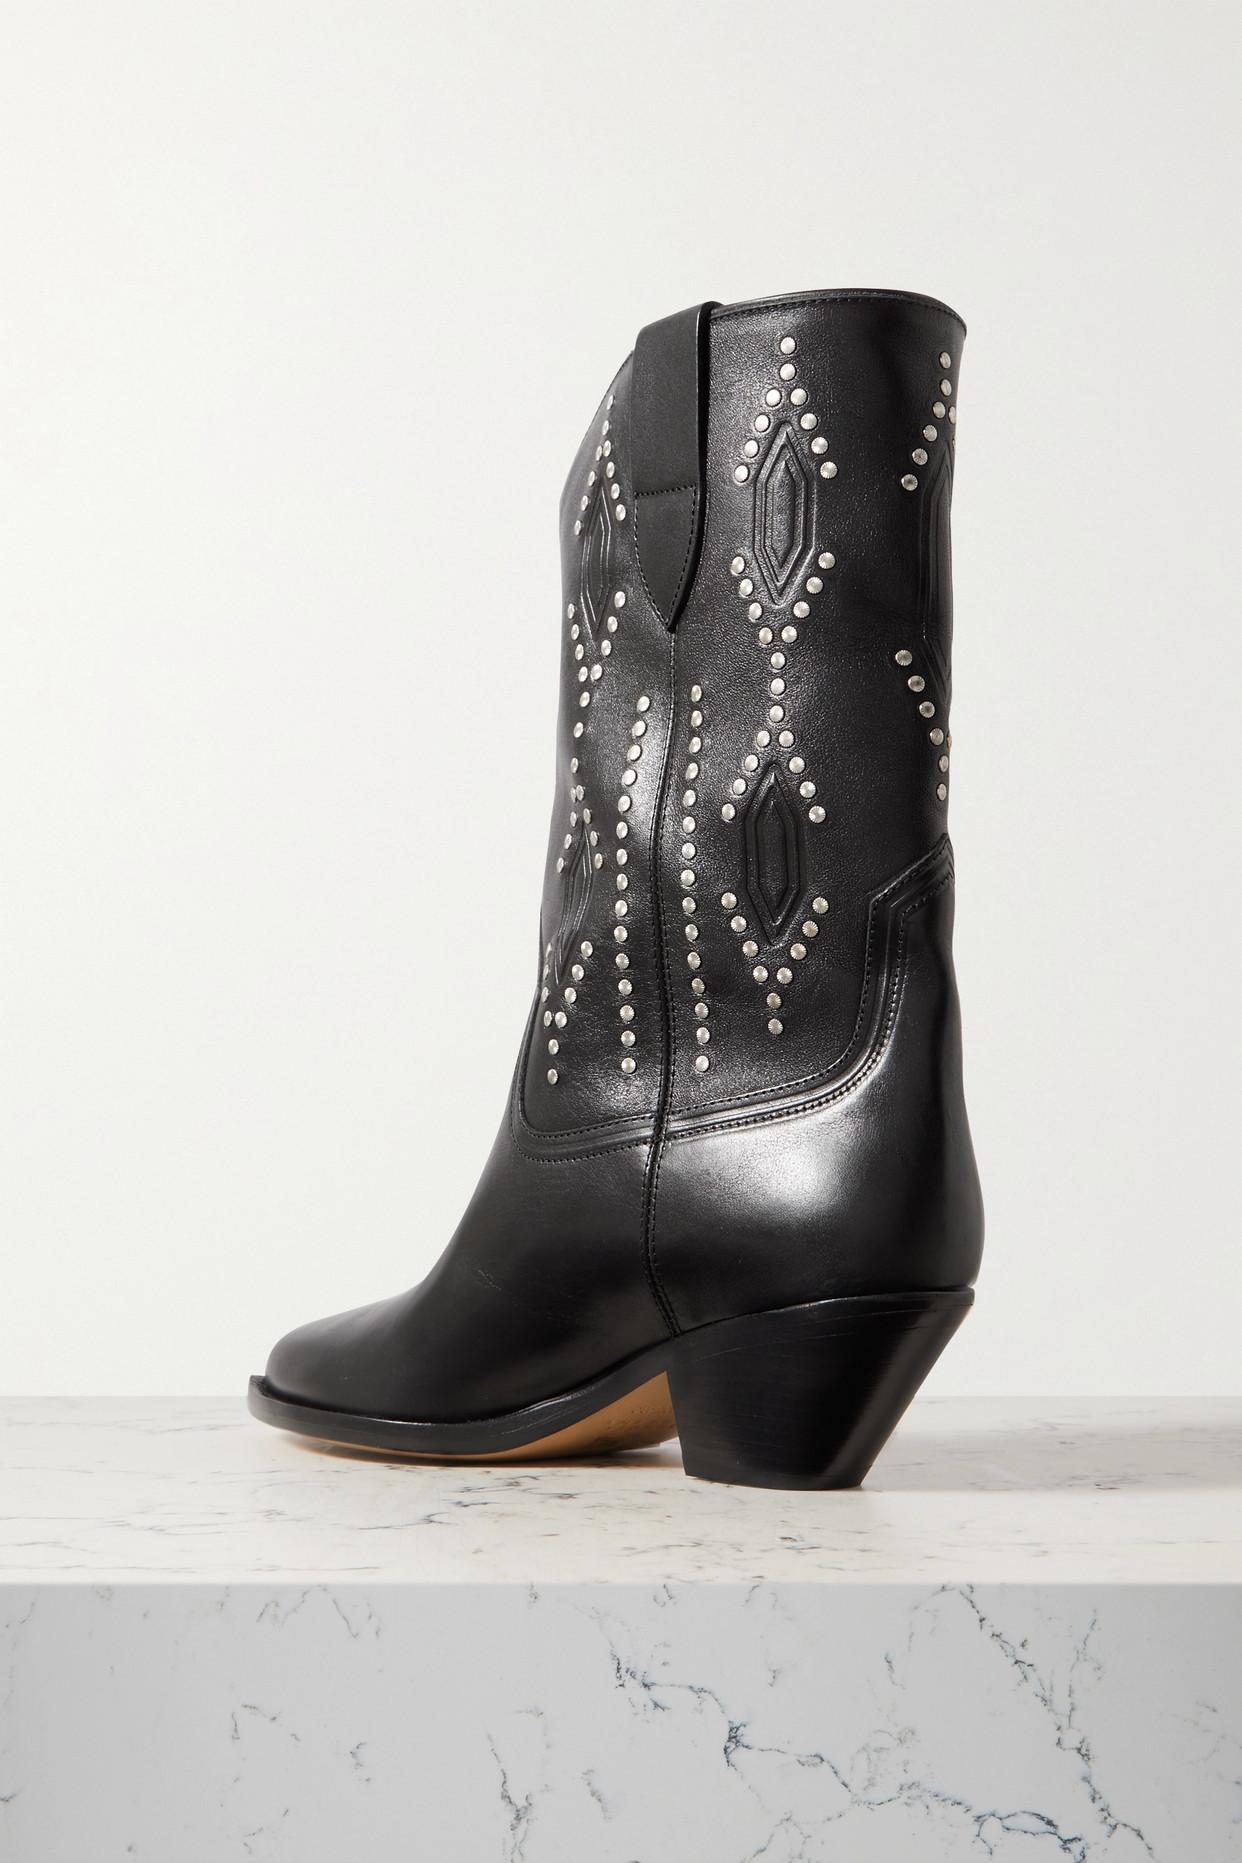 Isabel Marant Dahope Studded Leather Boots in Black | Lyst